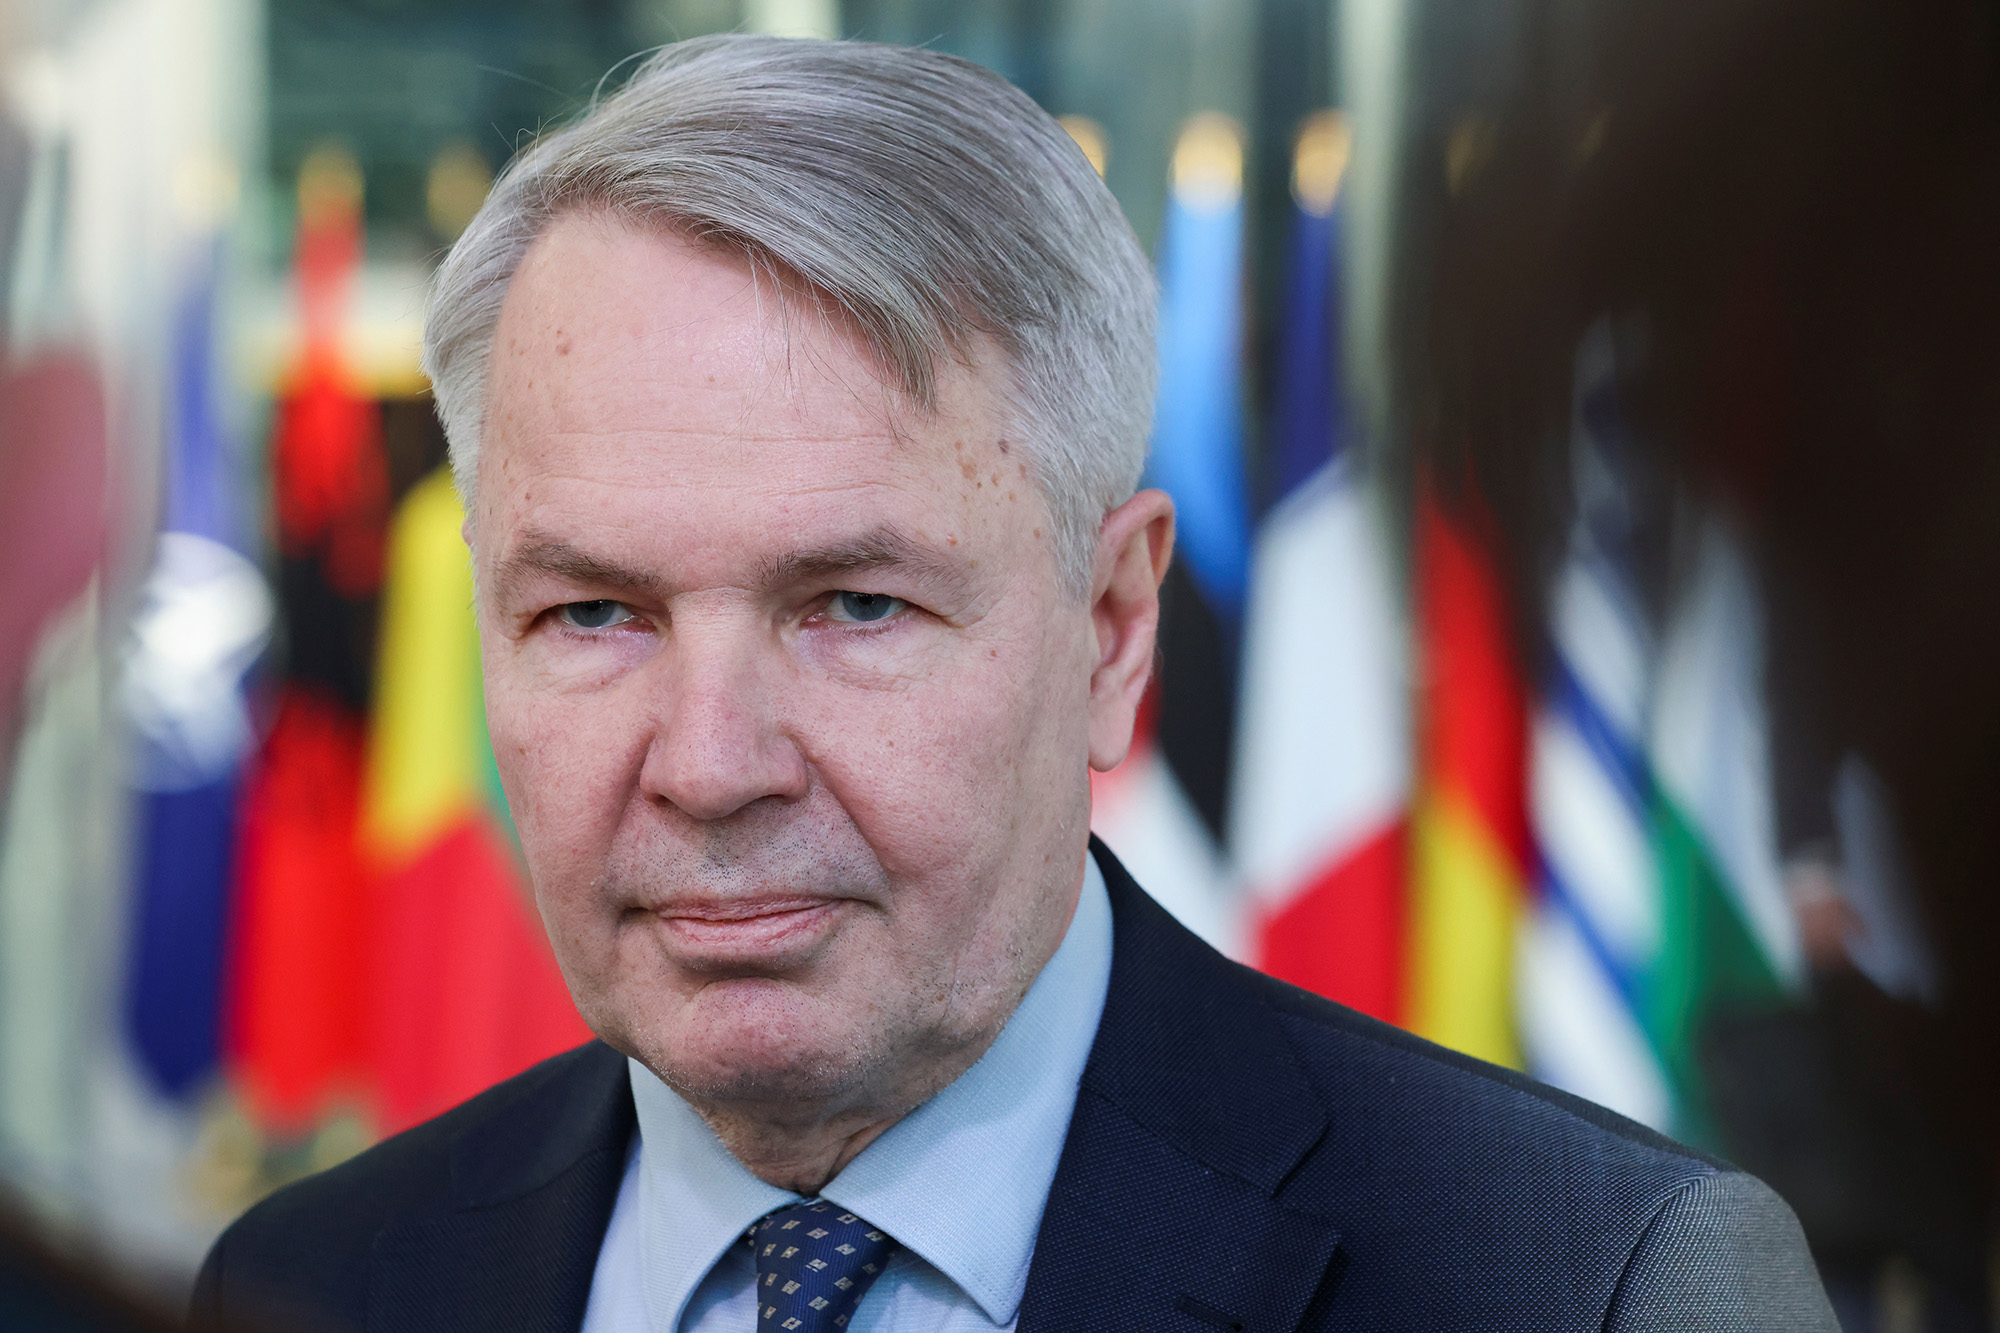 Finnish Foreign Minister Pekka Haavisto arrives to take part in a NATO foreign ministers meeting at the Alliance's headquarters in Brussels, Belgium, on March 4.